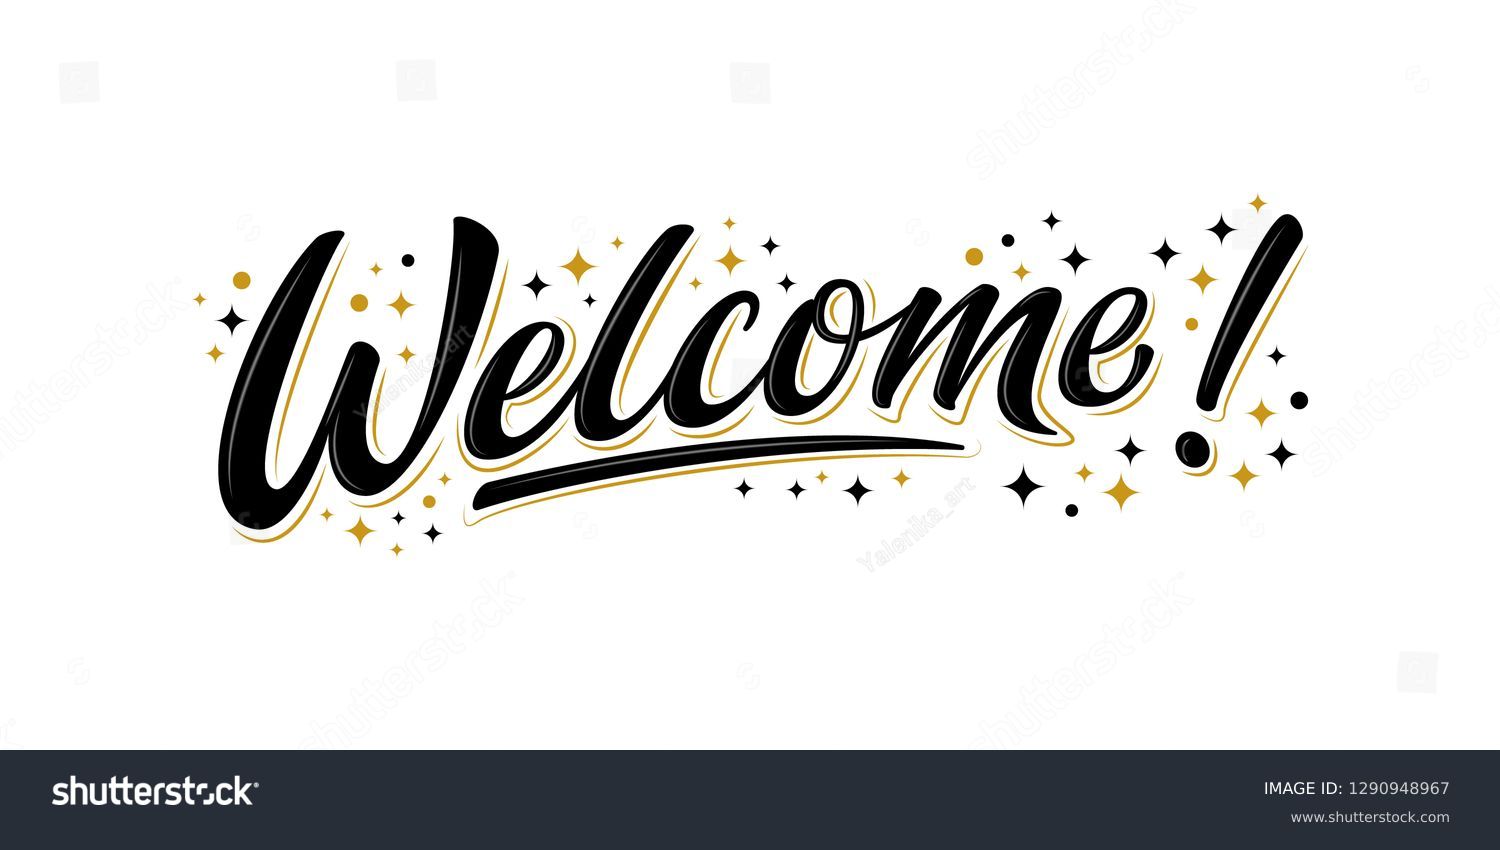 Welcome lettering sign with black / gold stars. Handwritten modern brush lettering on white background. Text for postcard, invitation, T-shirt print design, banner, poster, web, icon. Isolated vector #1290948967